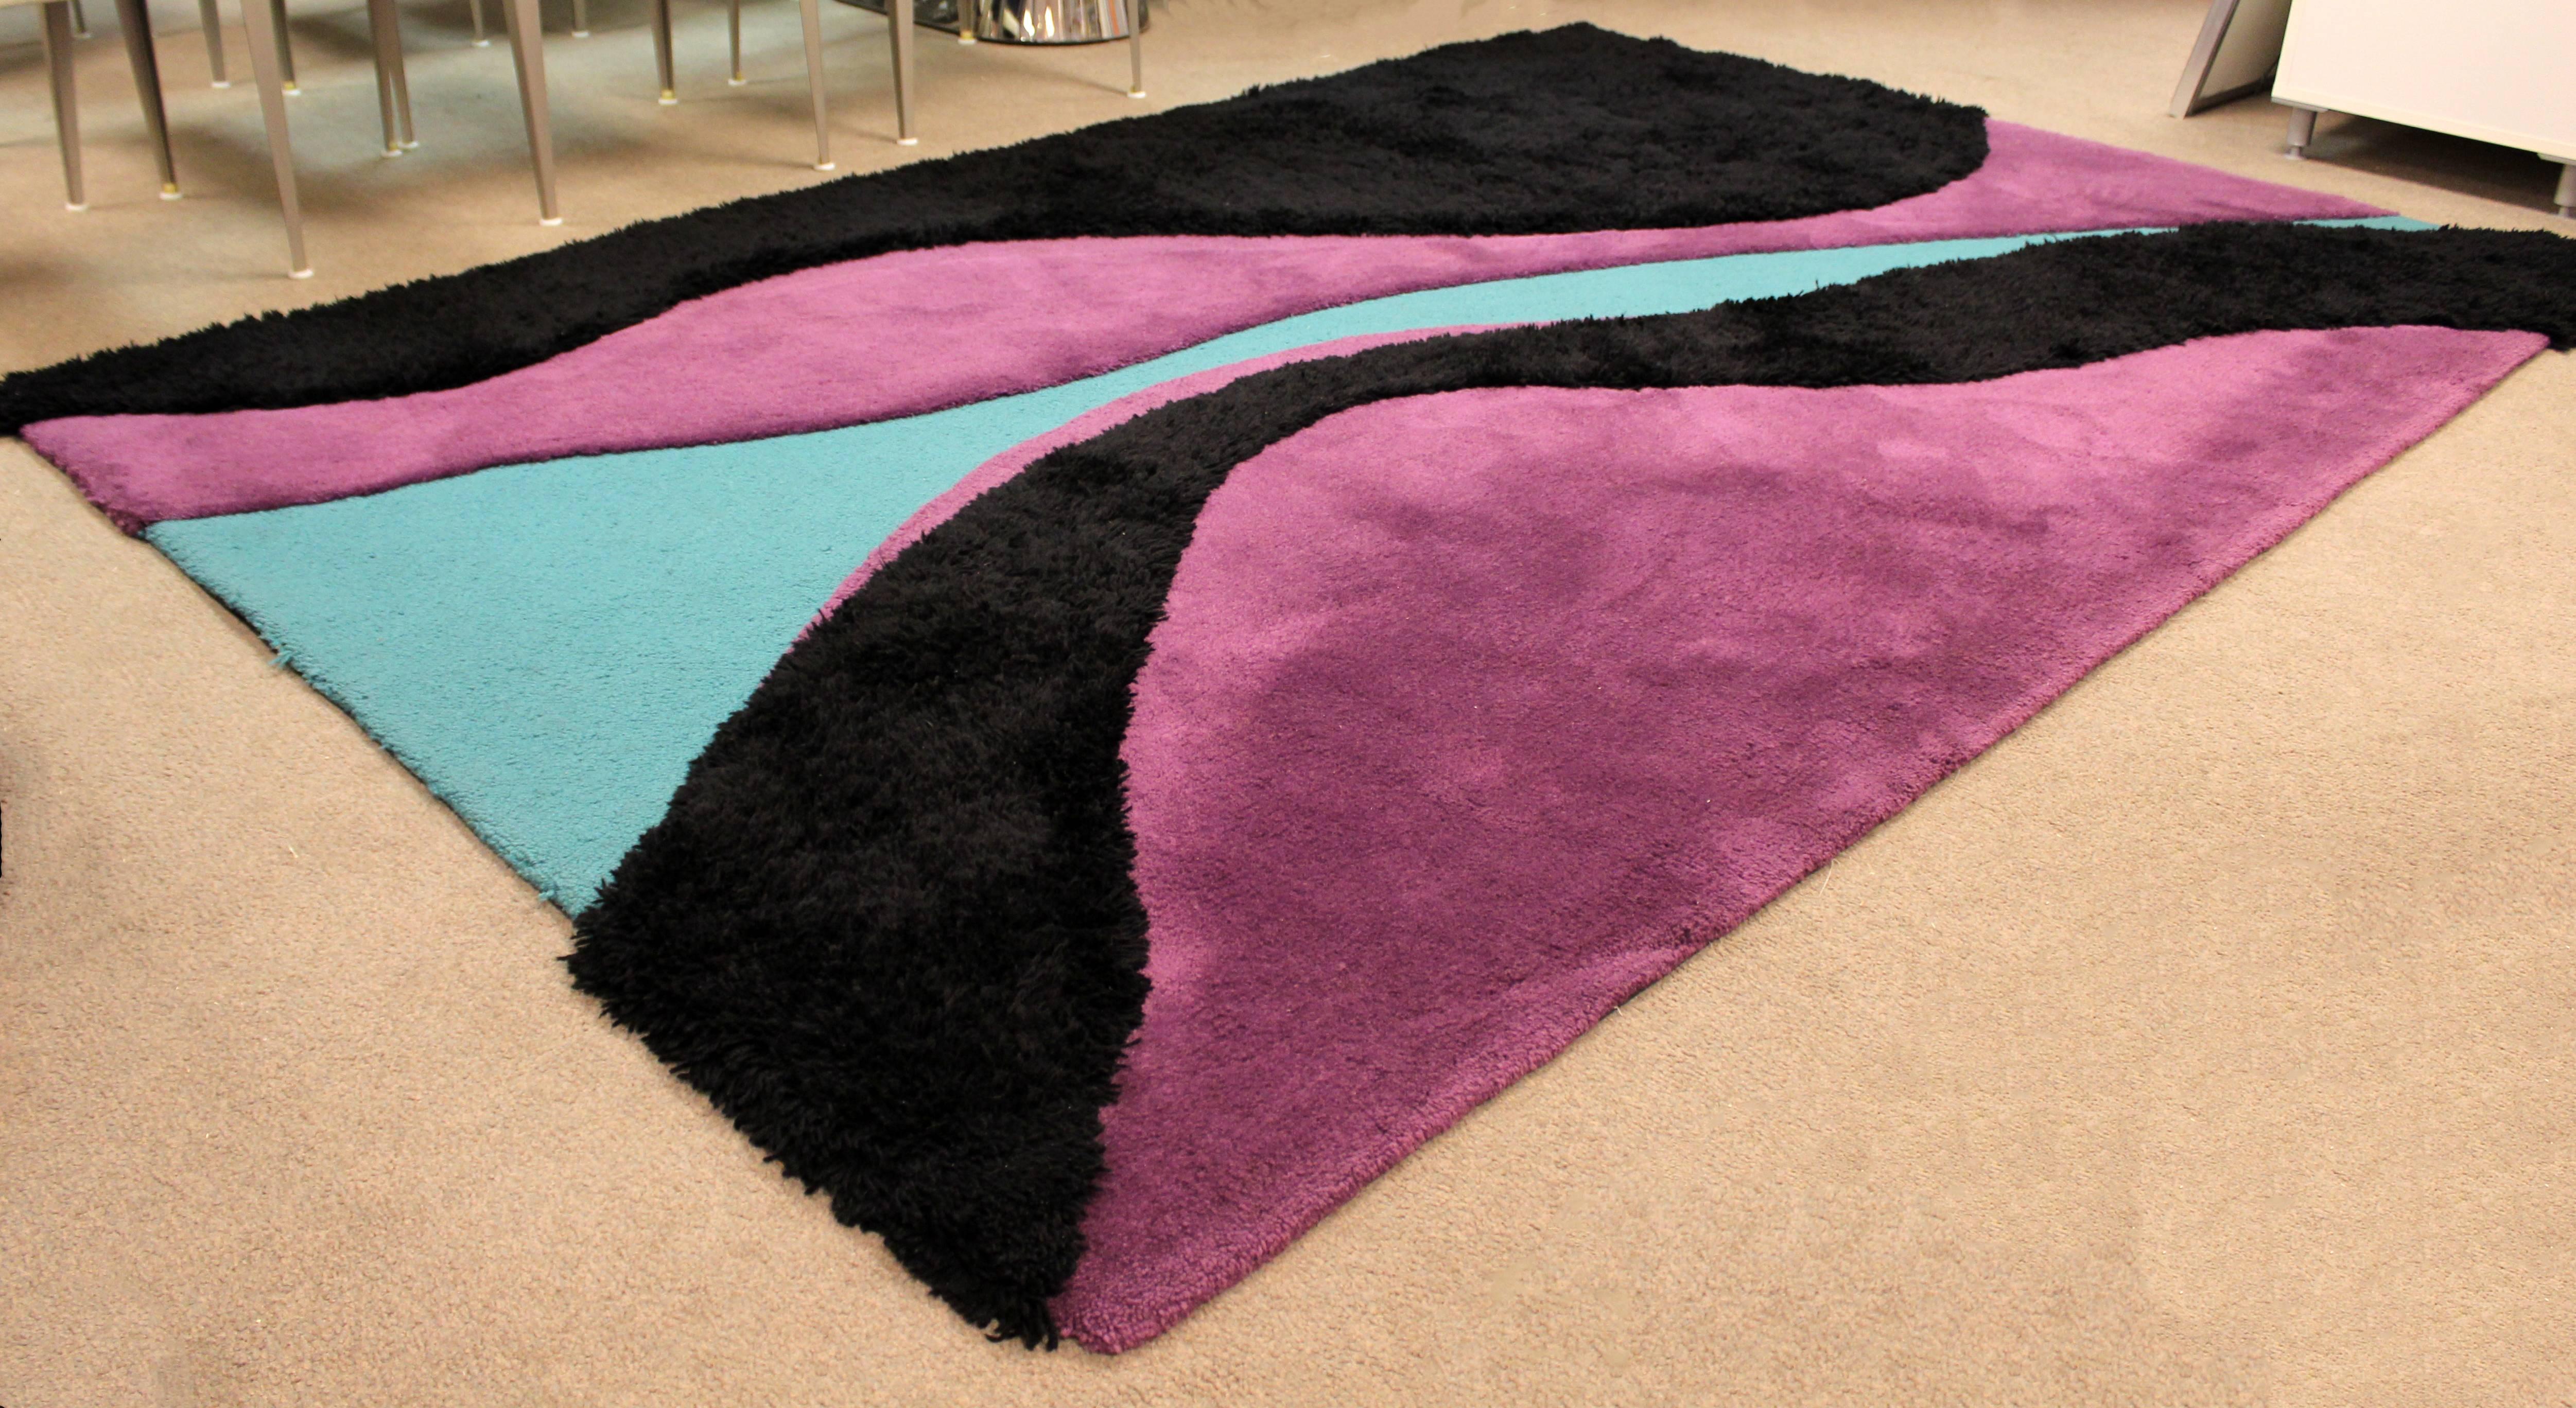 For your consideration is a fabulous area rug, made of 100% New Zealand wool colored black, teal and purple, by Carter Carpets, circa 1970s. In excellent condition. The dimensions are 110